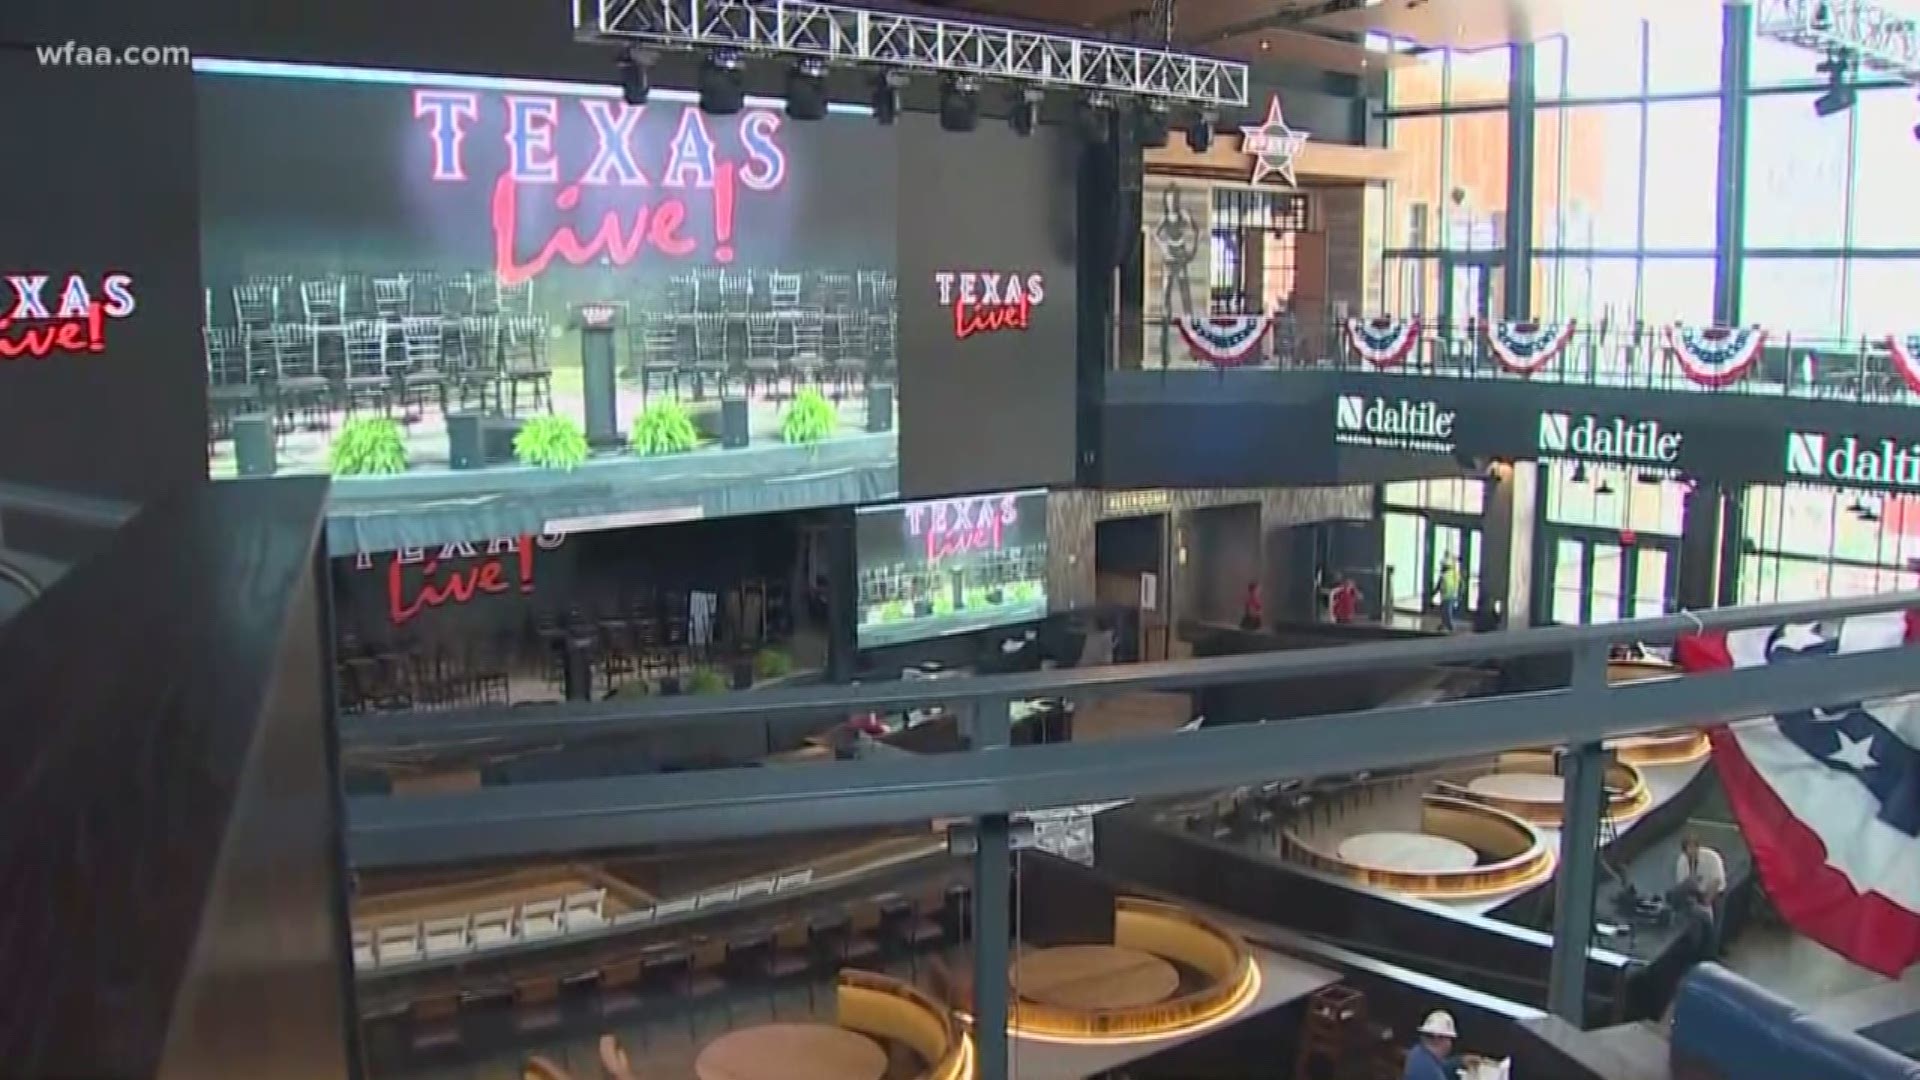 Built for fun and fans, Texas Live! opens